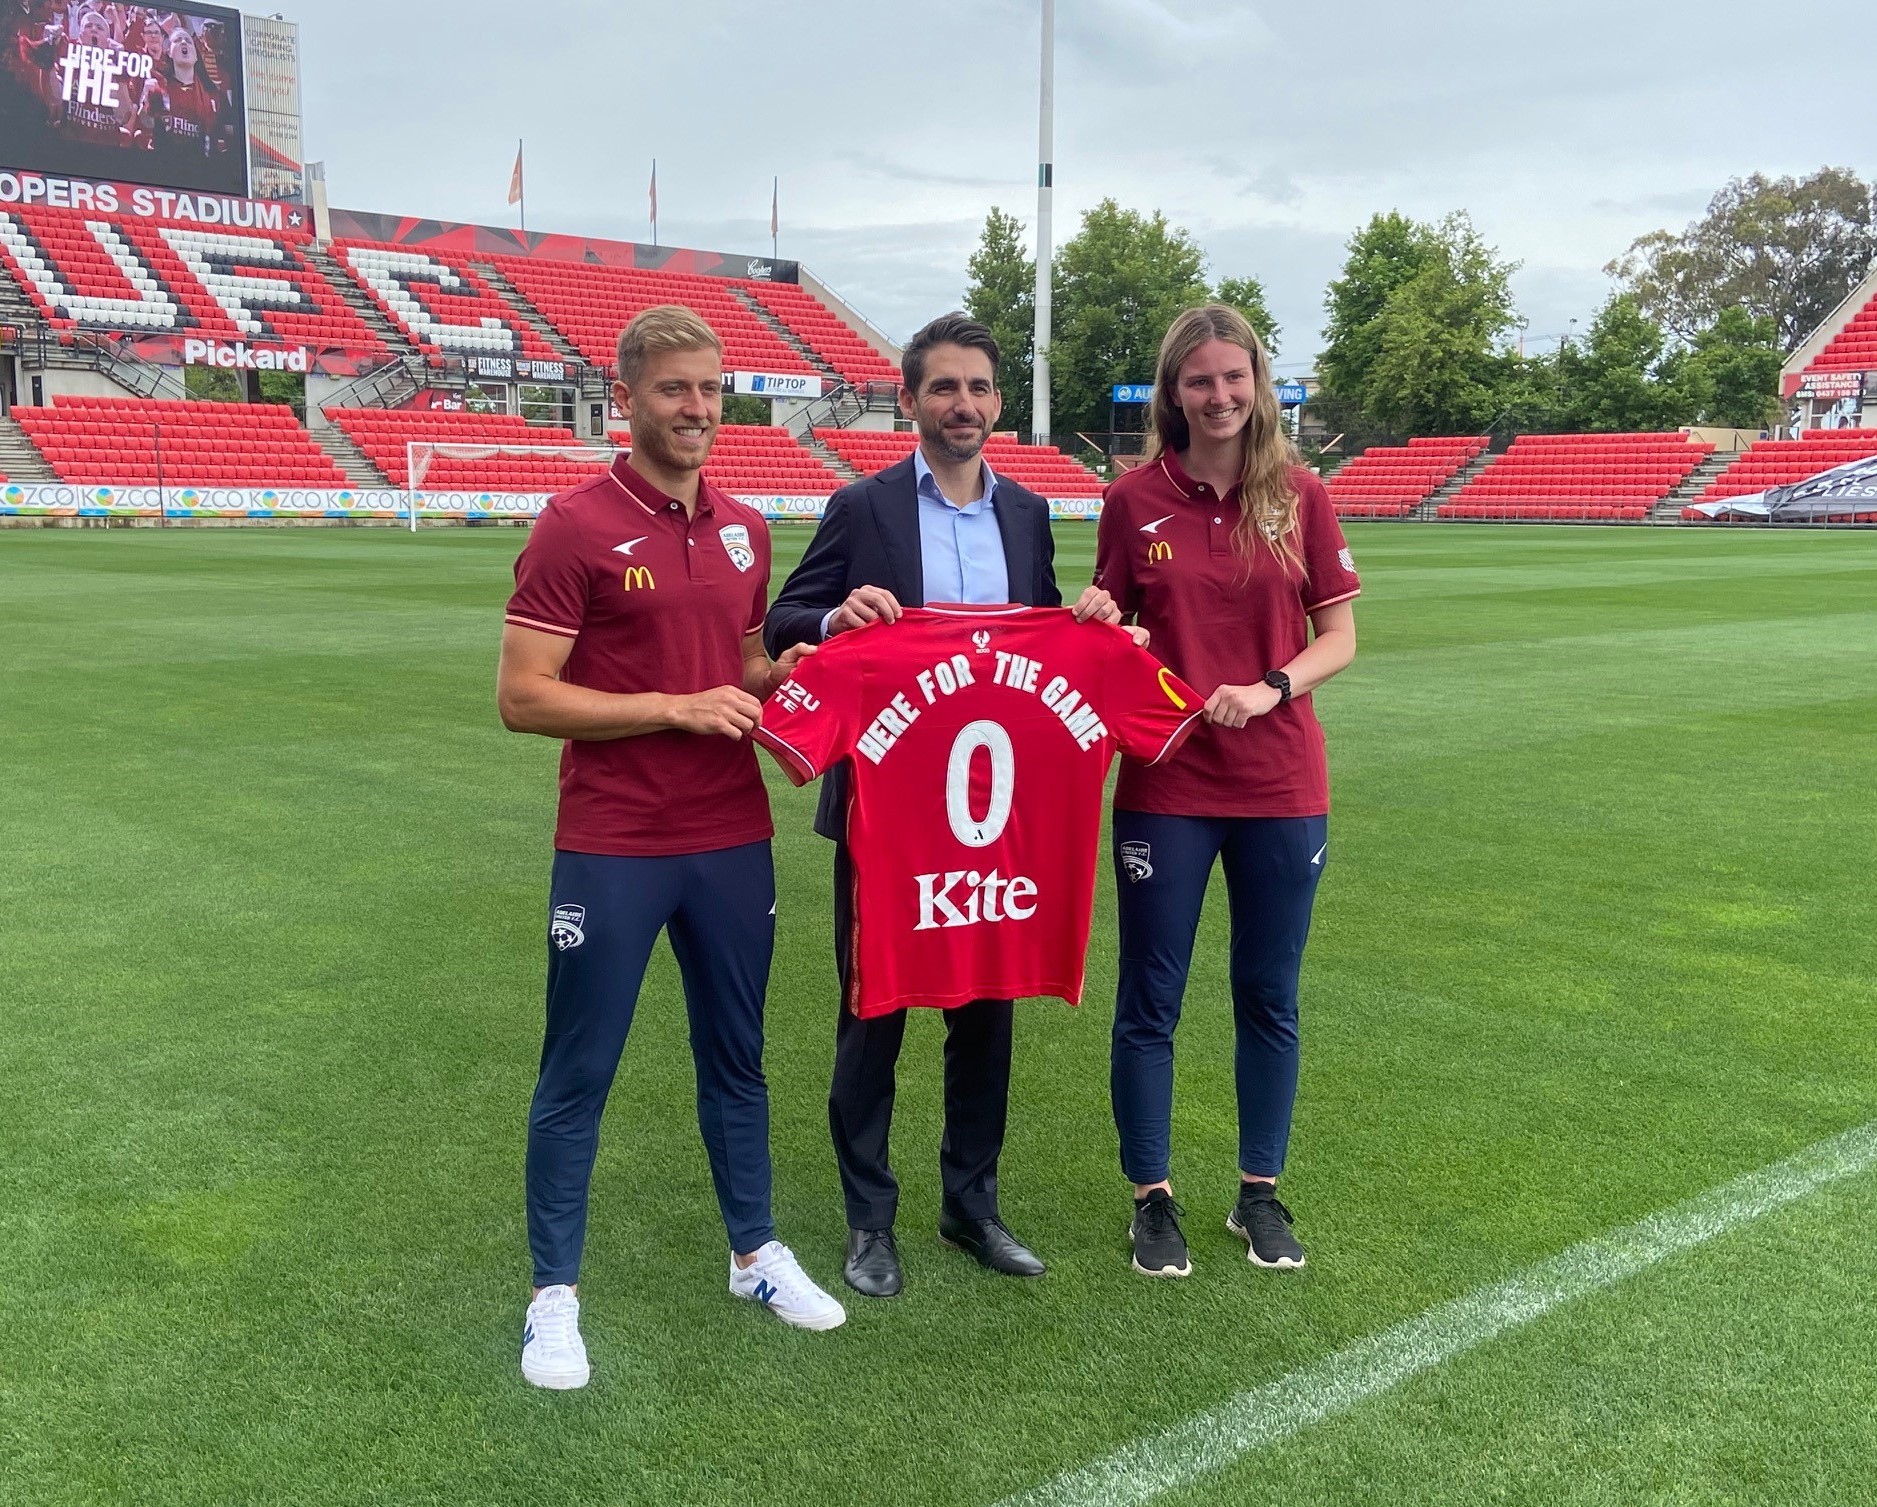 AUFC CEO and players holding up AUFC jersey